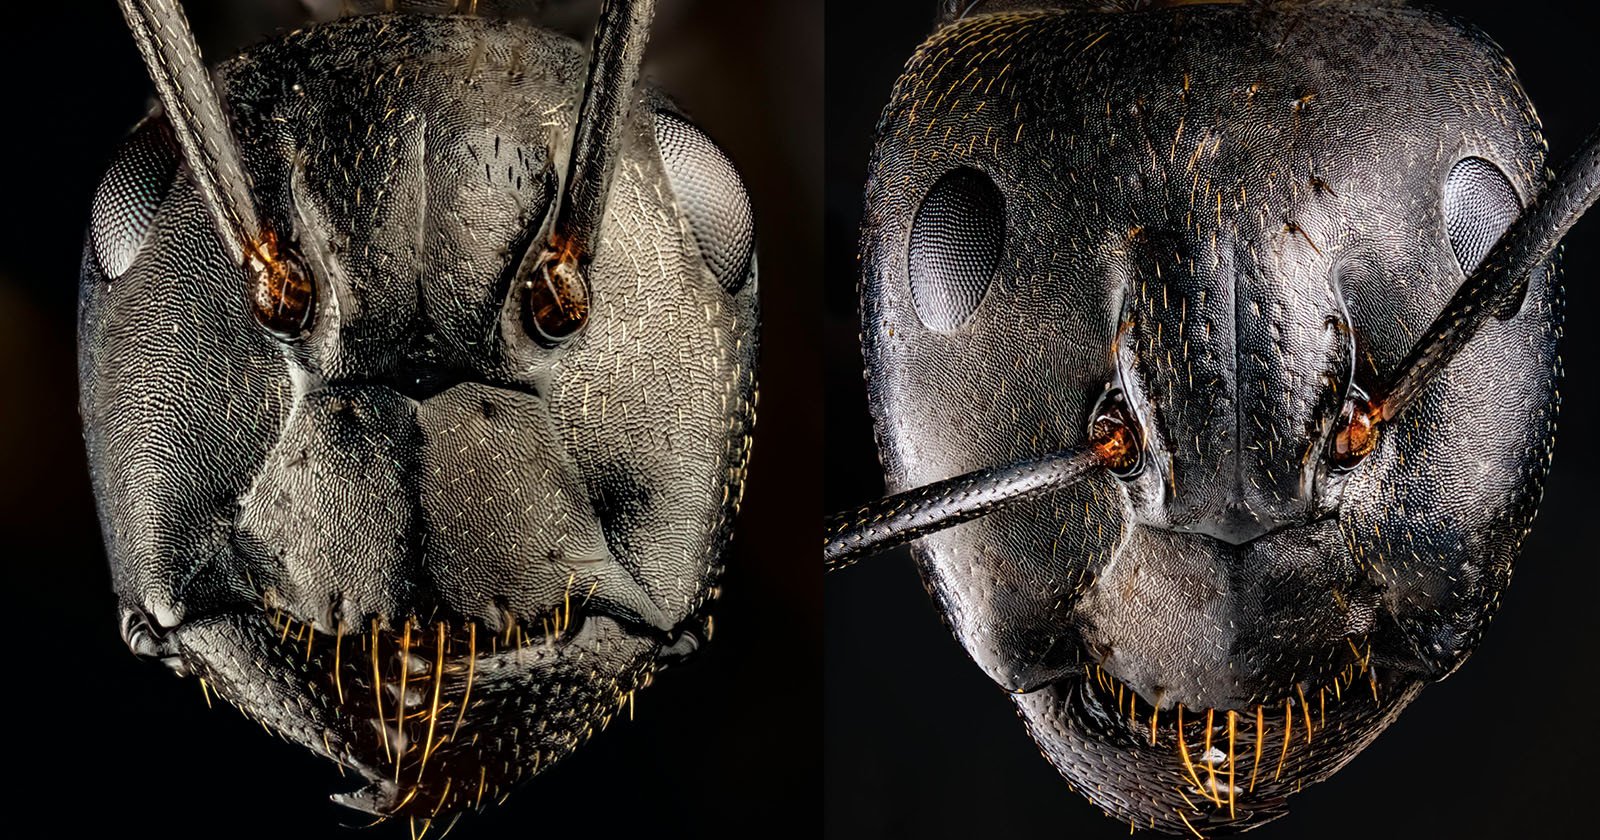 These Ultra-Detailed Photos of Ants Will Give You Nightmares